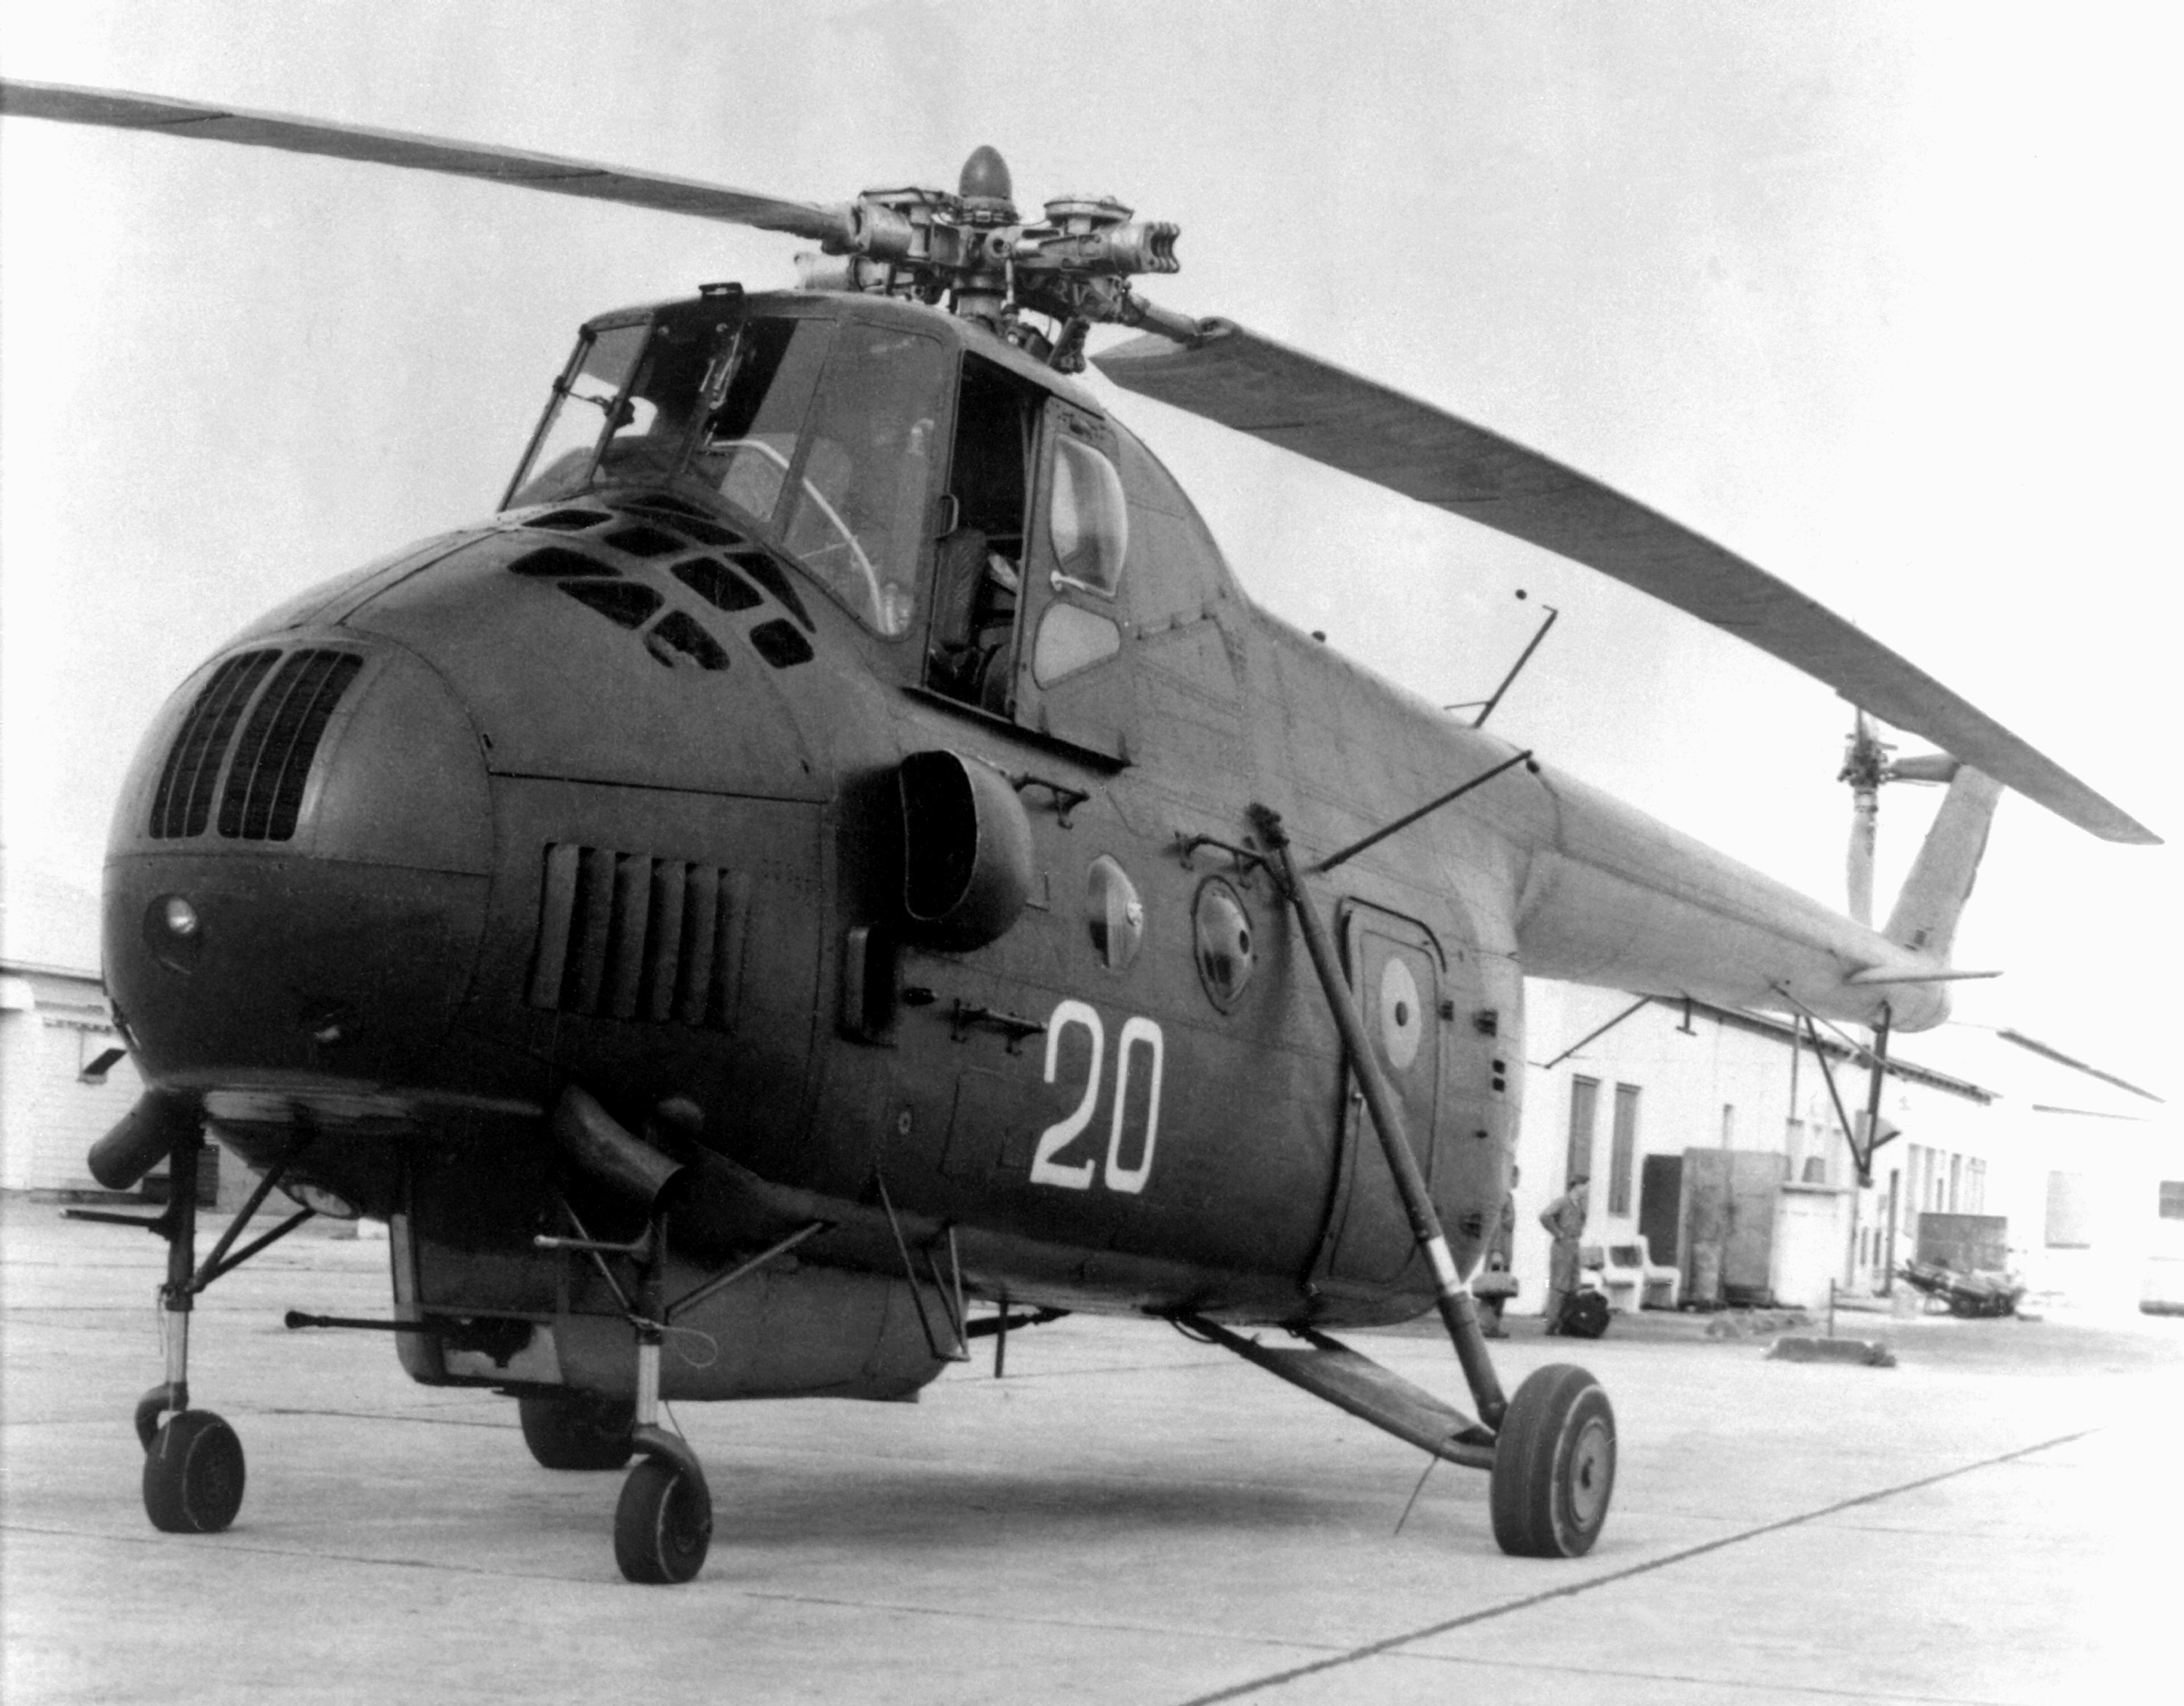 Soviet helicopter photo